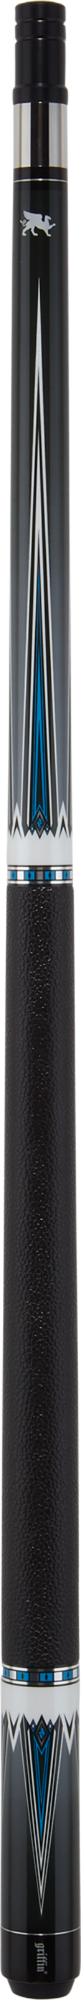 Griffin Griffin GR61 Pool Cue Pool Cue